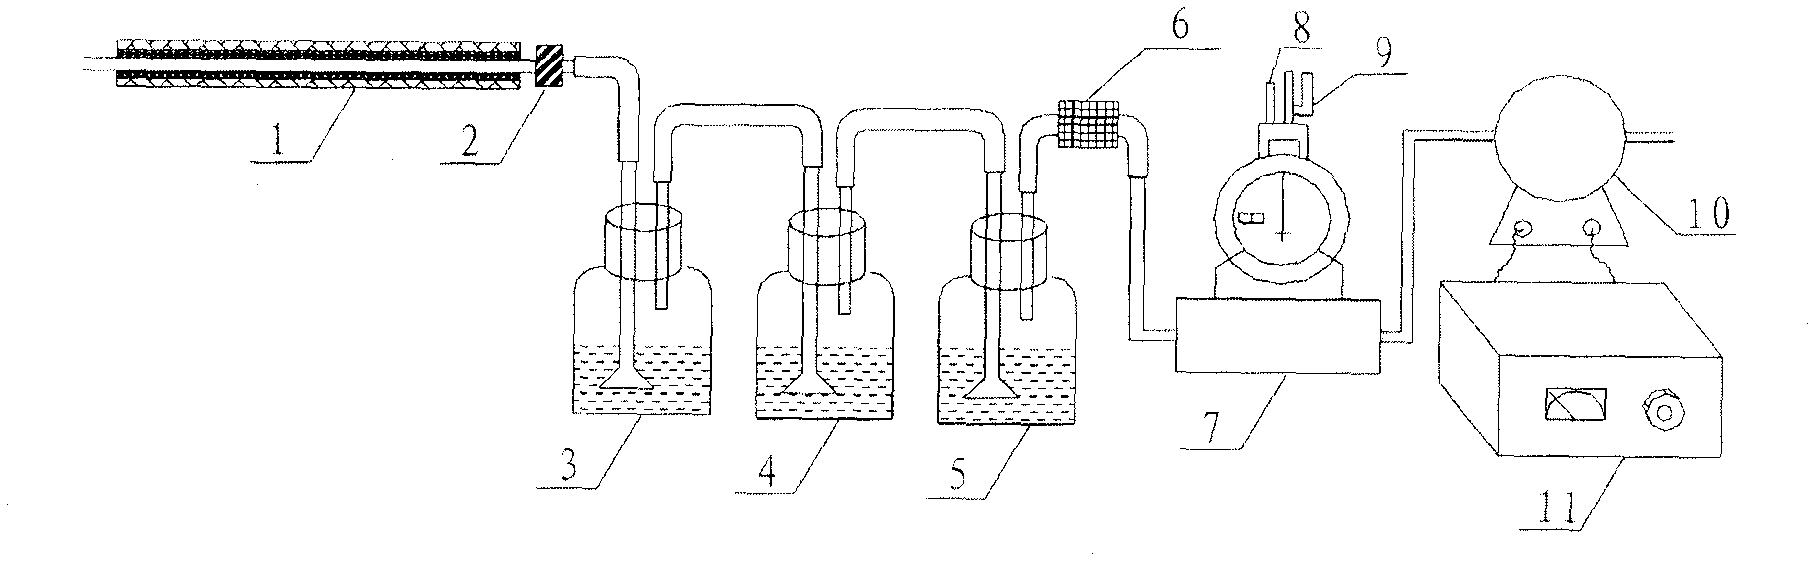 System for determining SO3 in flue gas